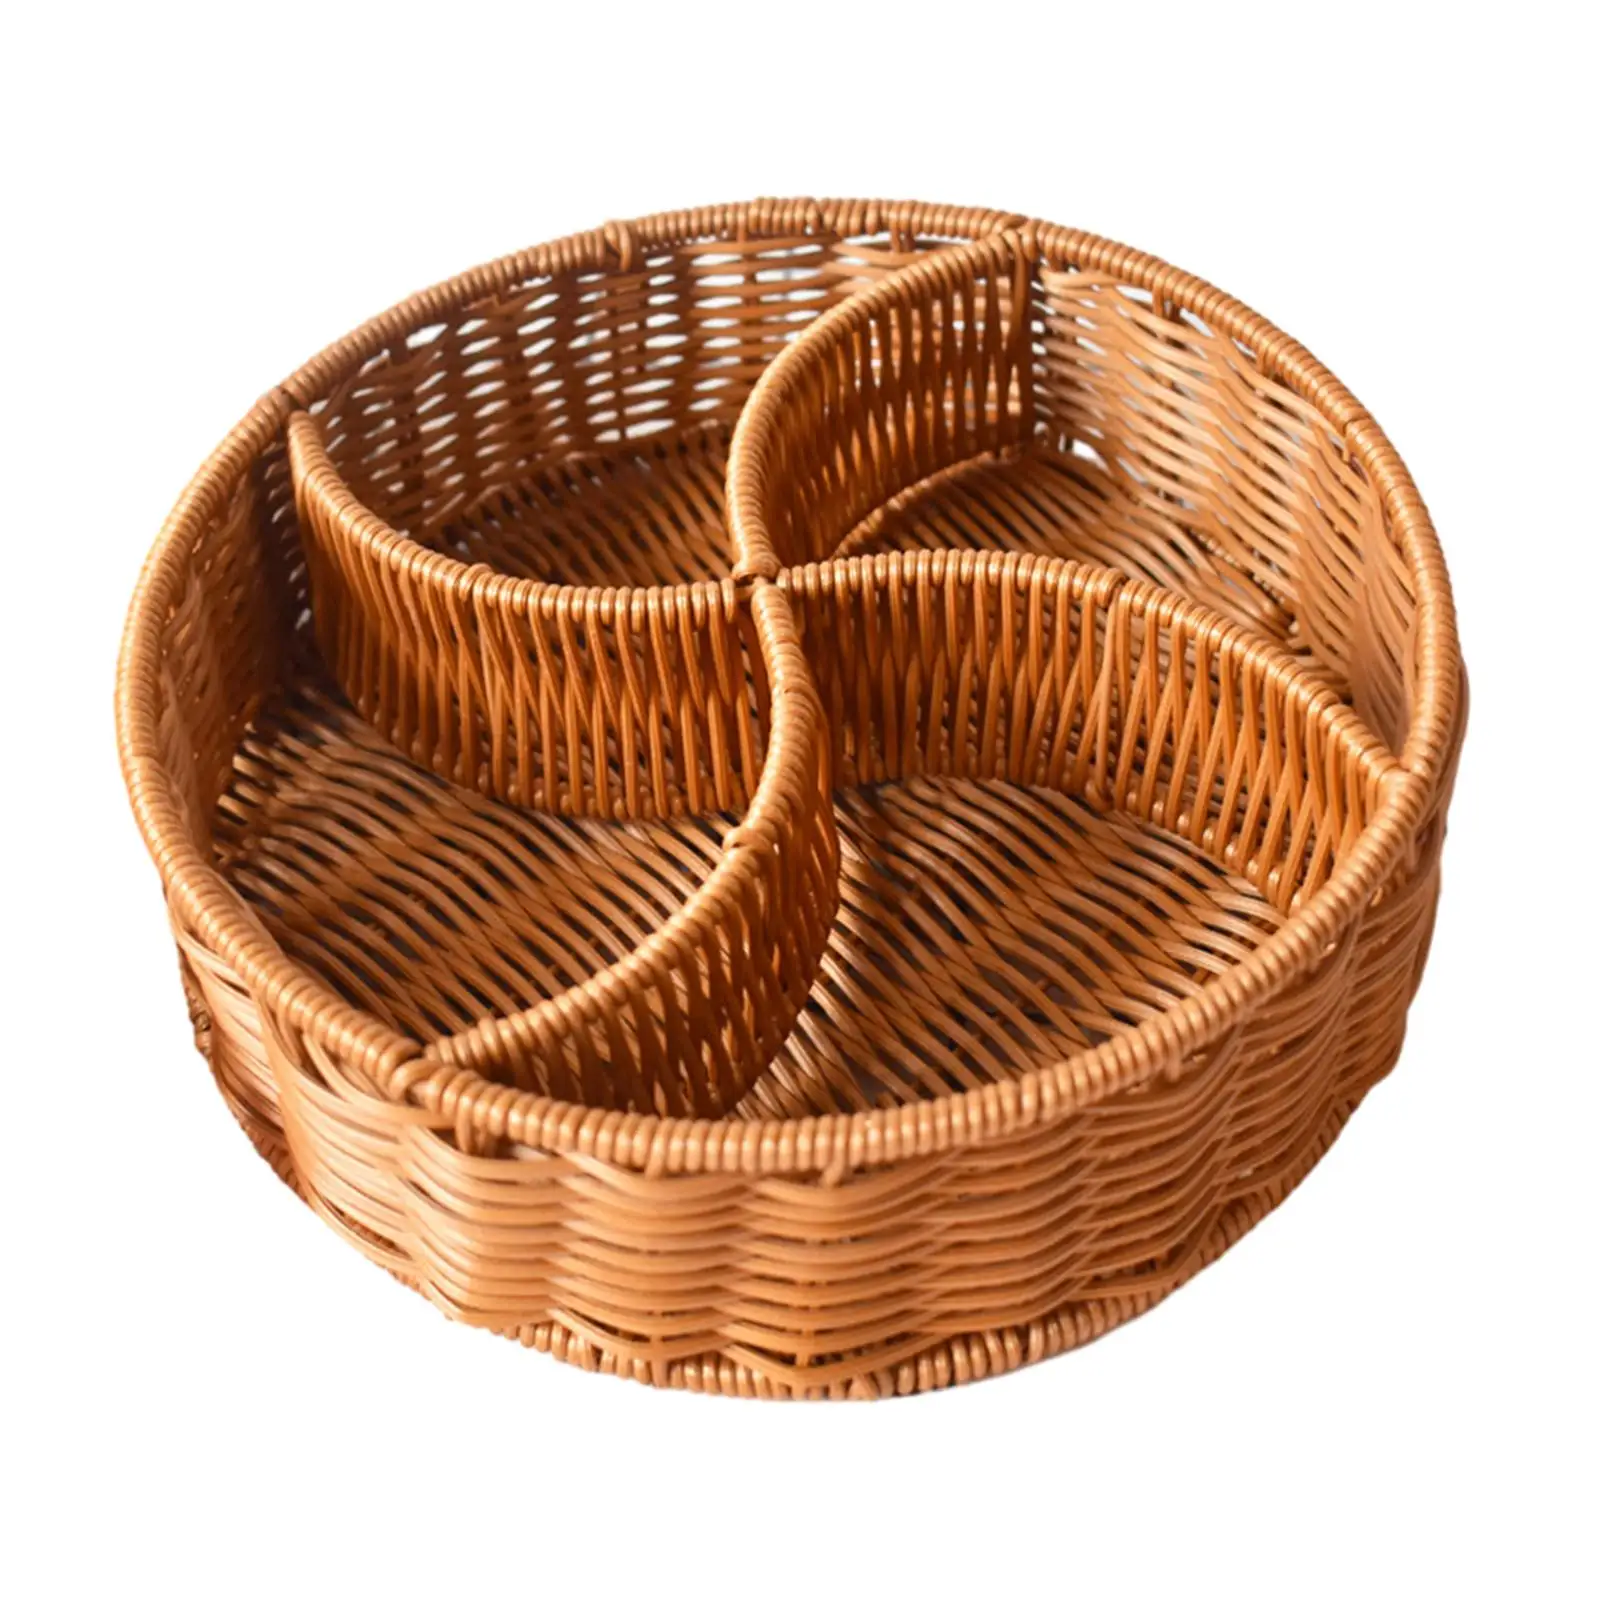 Woven Serving Basket Snack Platter Tray Rustic Decorative Organizer for Coffee Table Wedding Gift Hotel Restaurant Pantry